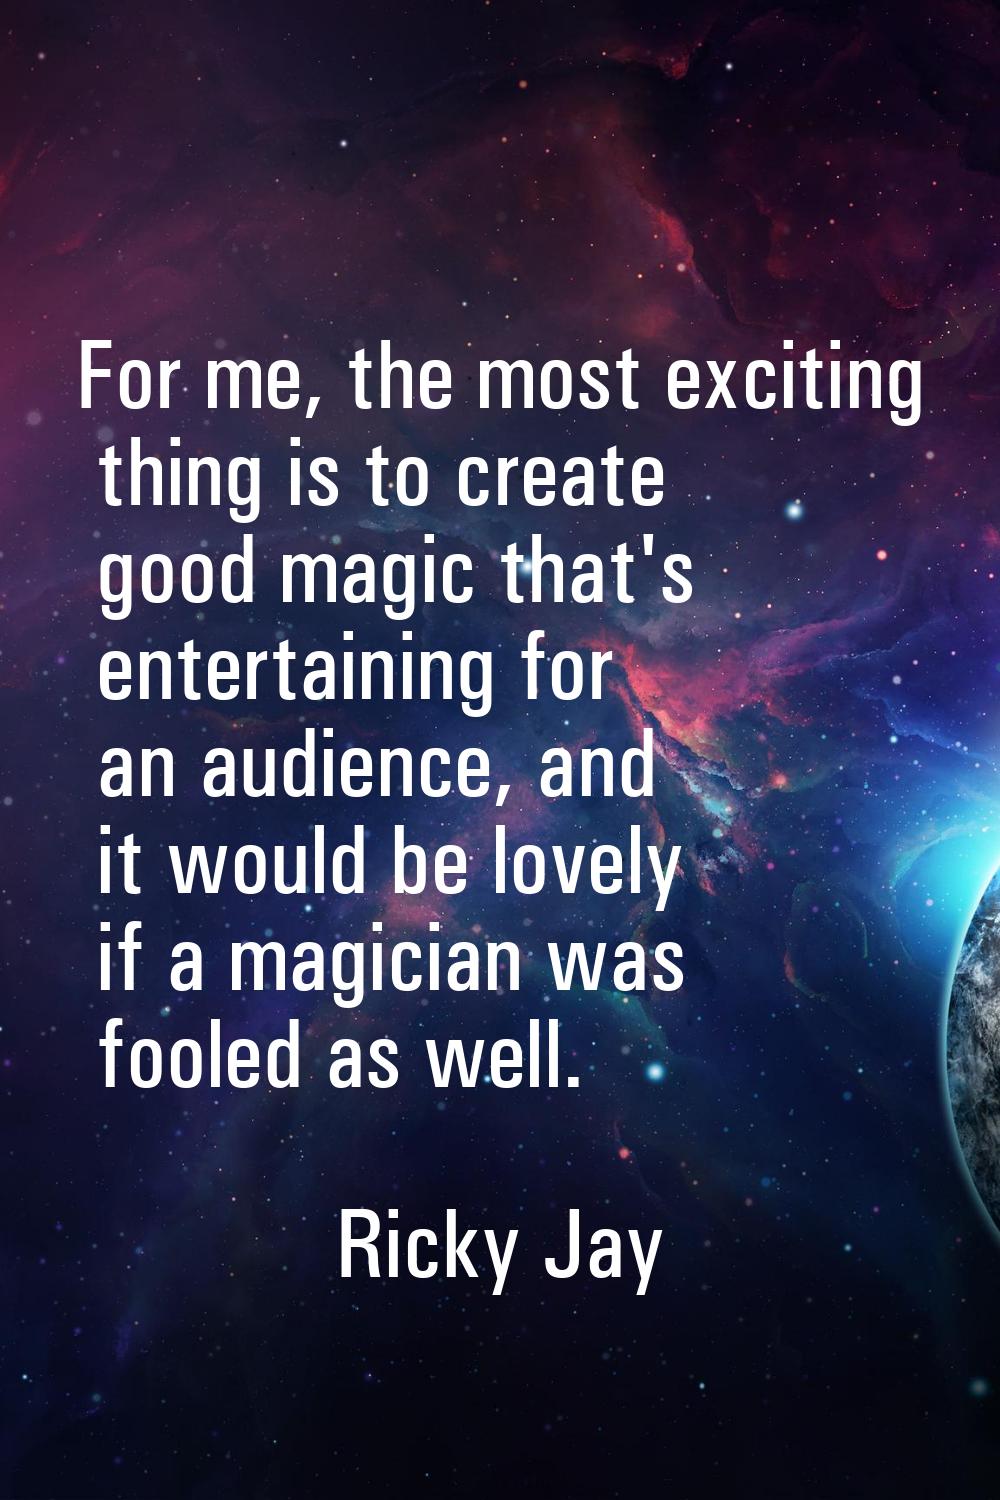 For me, the most exciting thing is to create good magic that's entertaining for an audience, and it